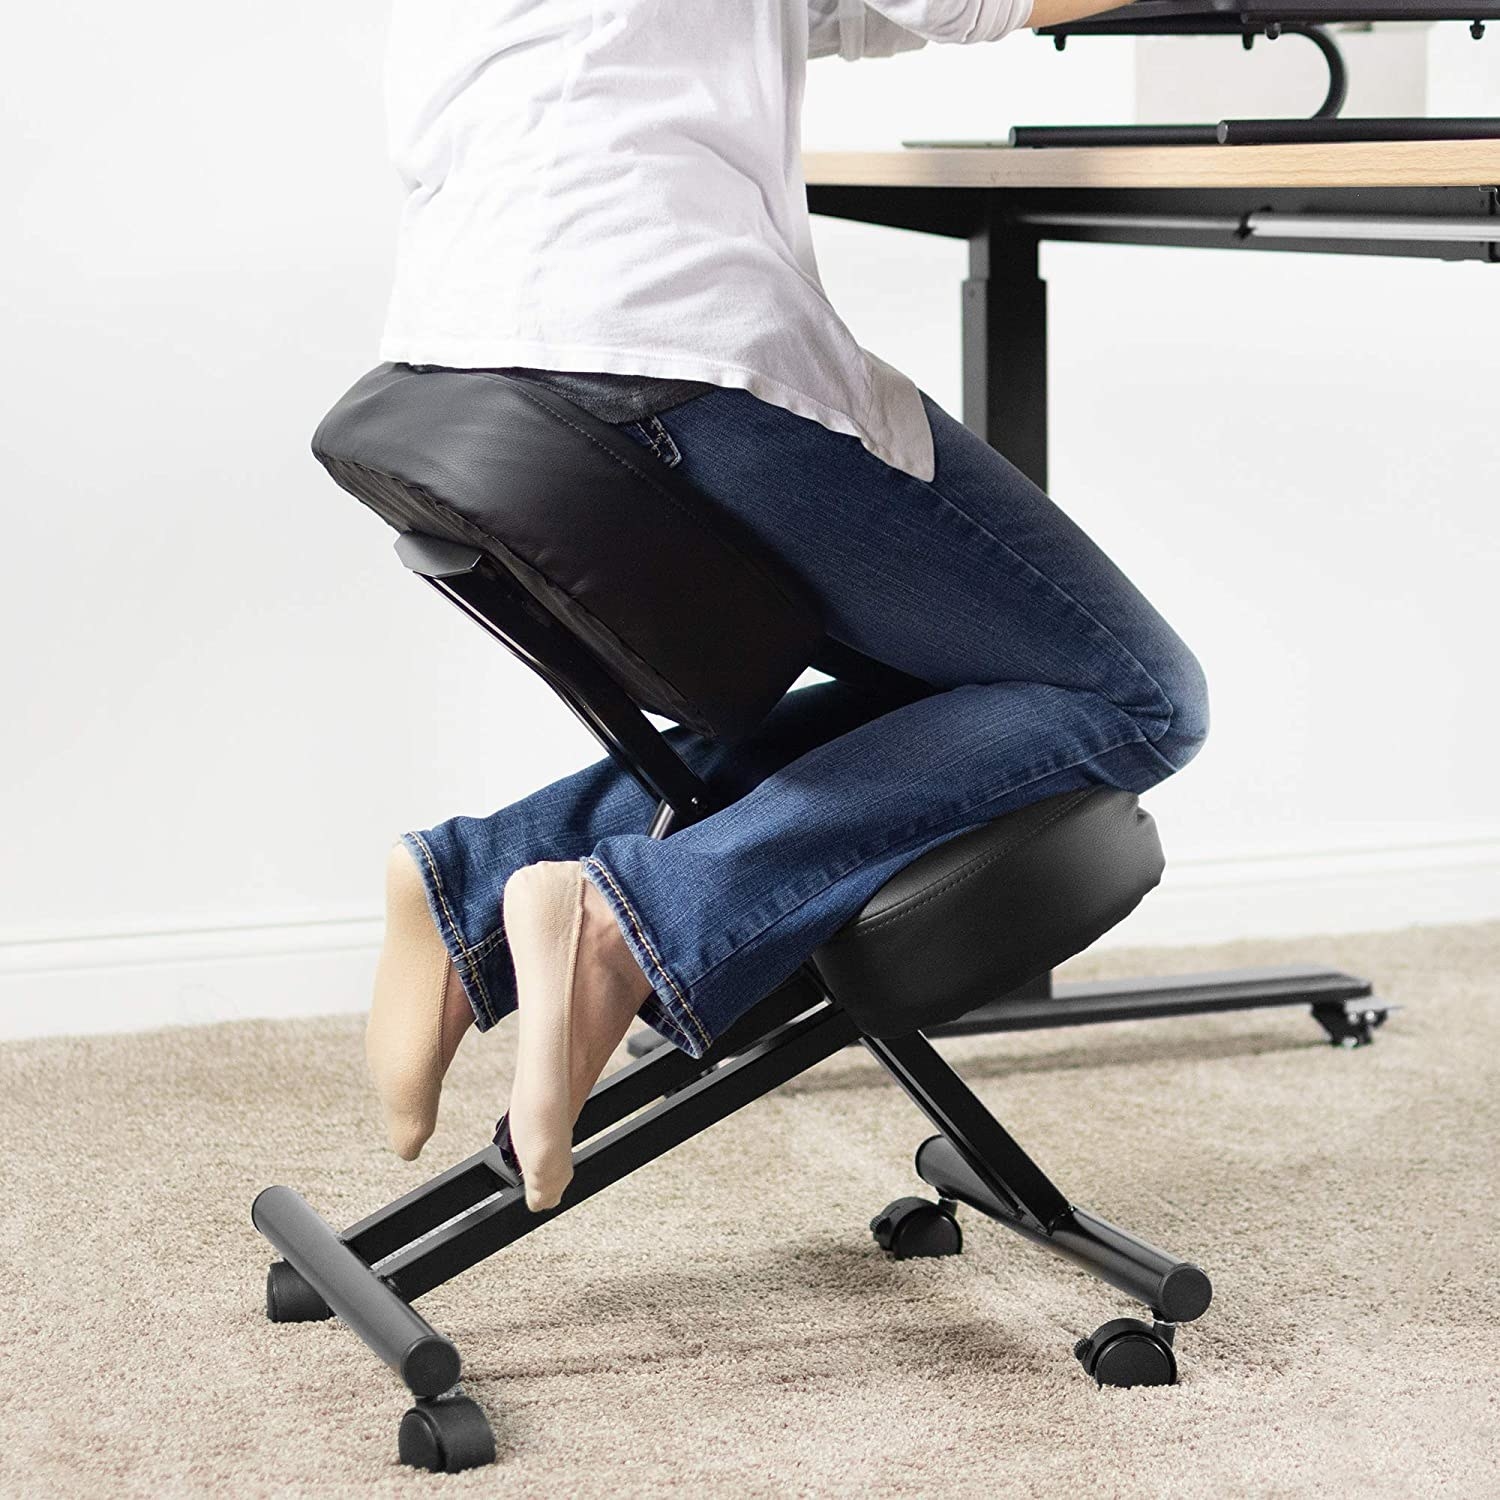 a person kneeling on an ergonomic office chair